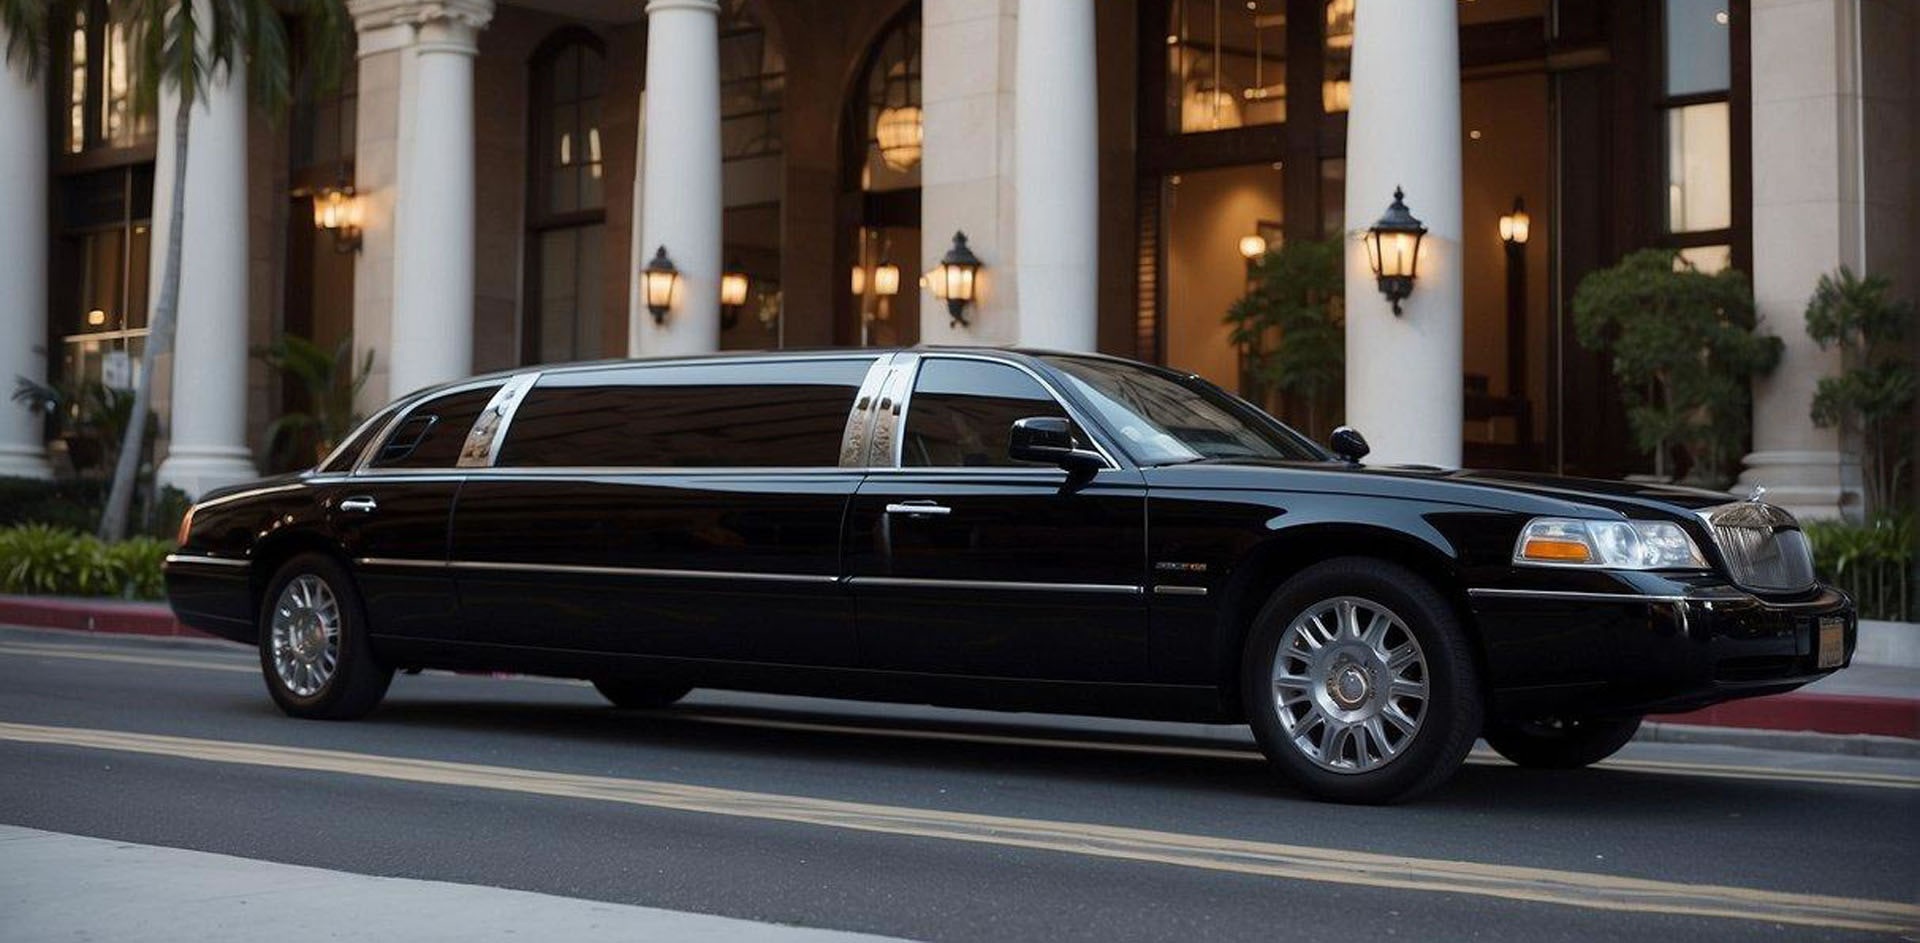 A sleek, modern limousine pulls up to a high-end hotel entrance in downtown San Diego, with the city skyline in the background